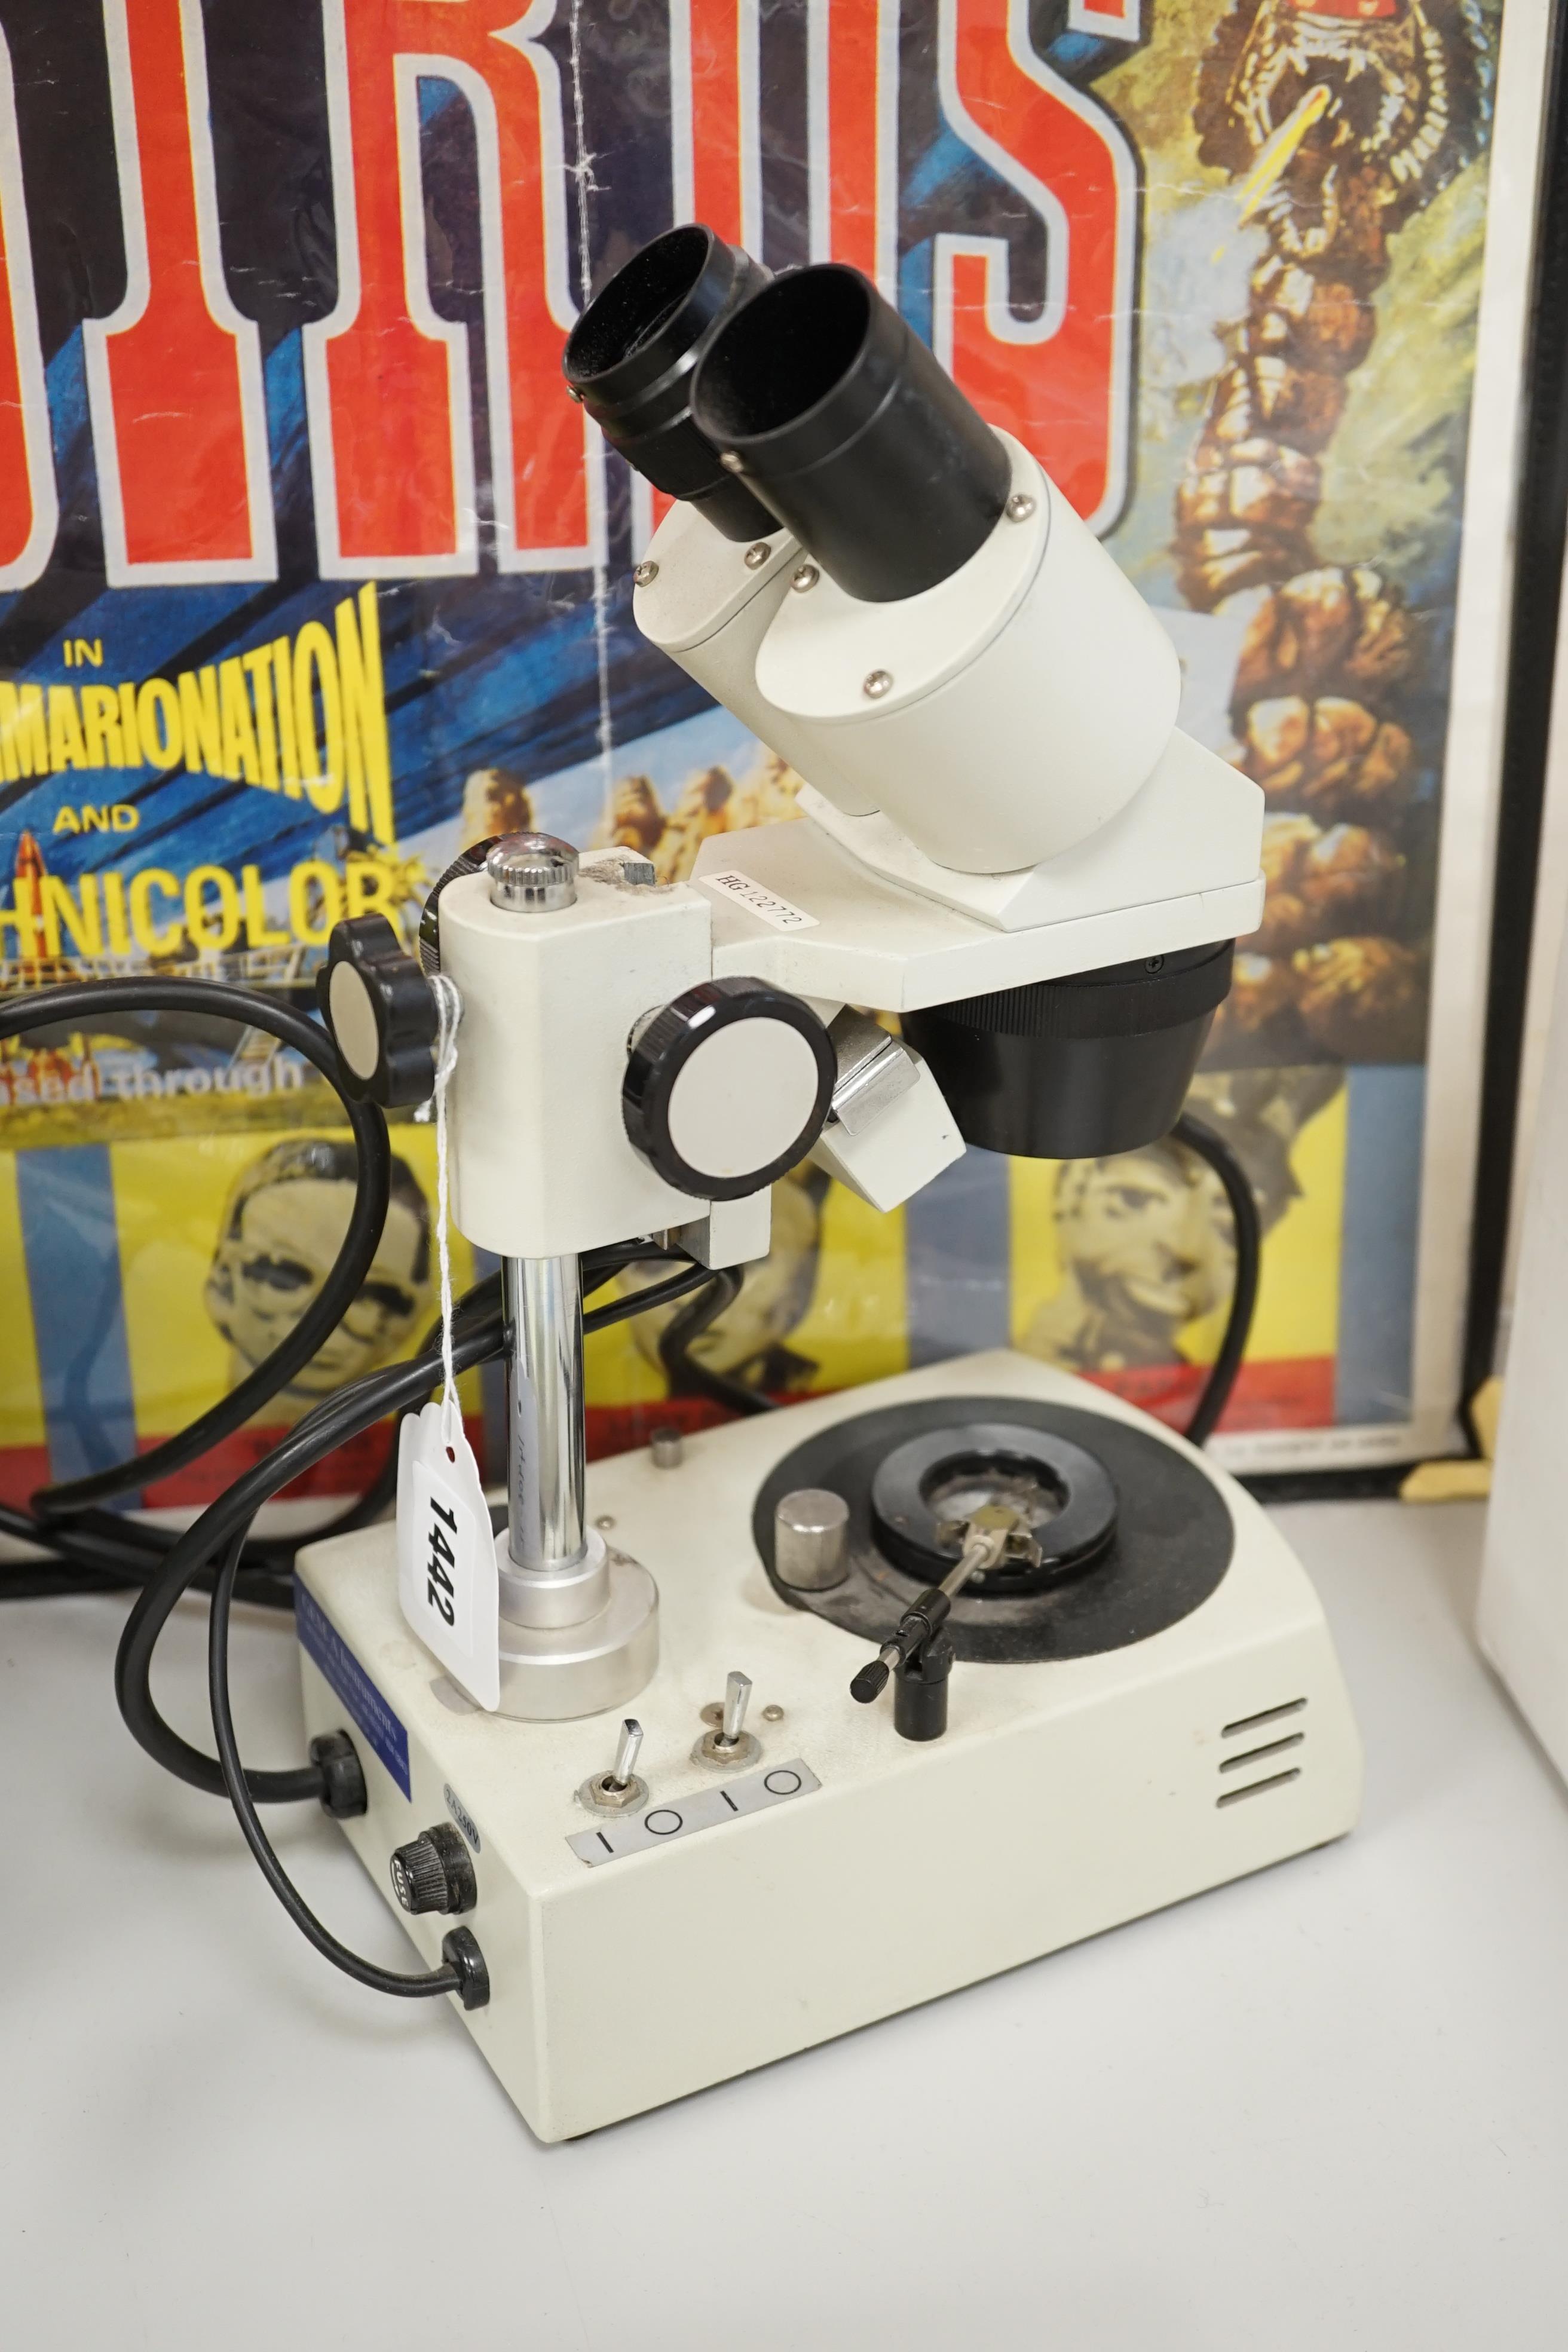 A Gem A Instruments binocular microscope, 31cm high. Condition - fair with some wear and possible parts missing.